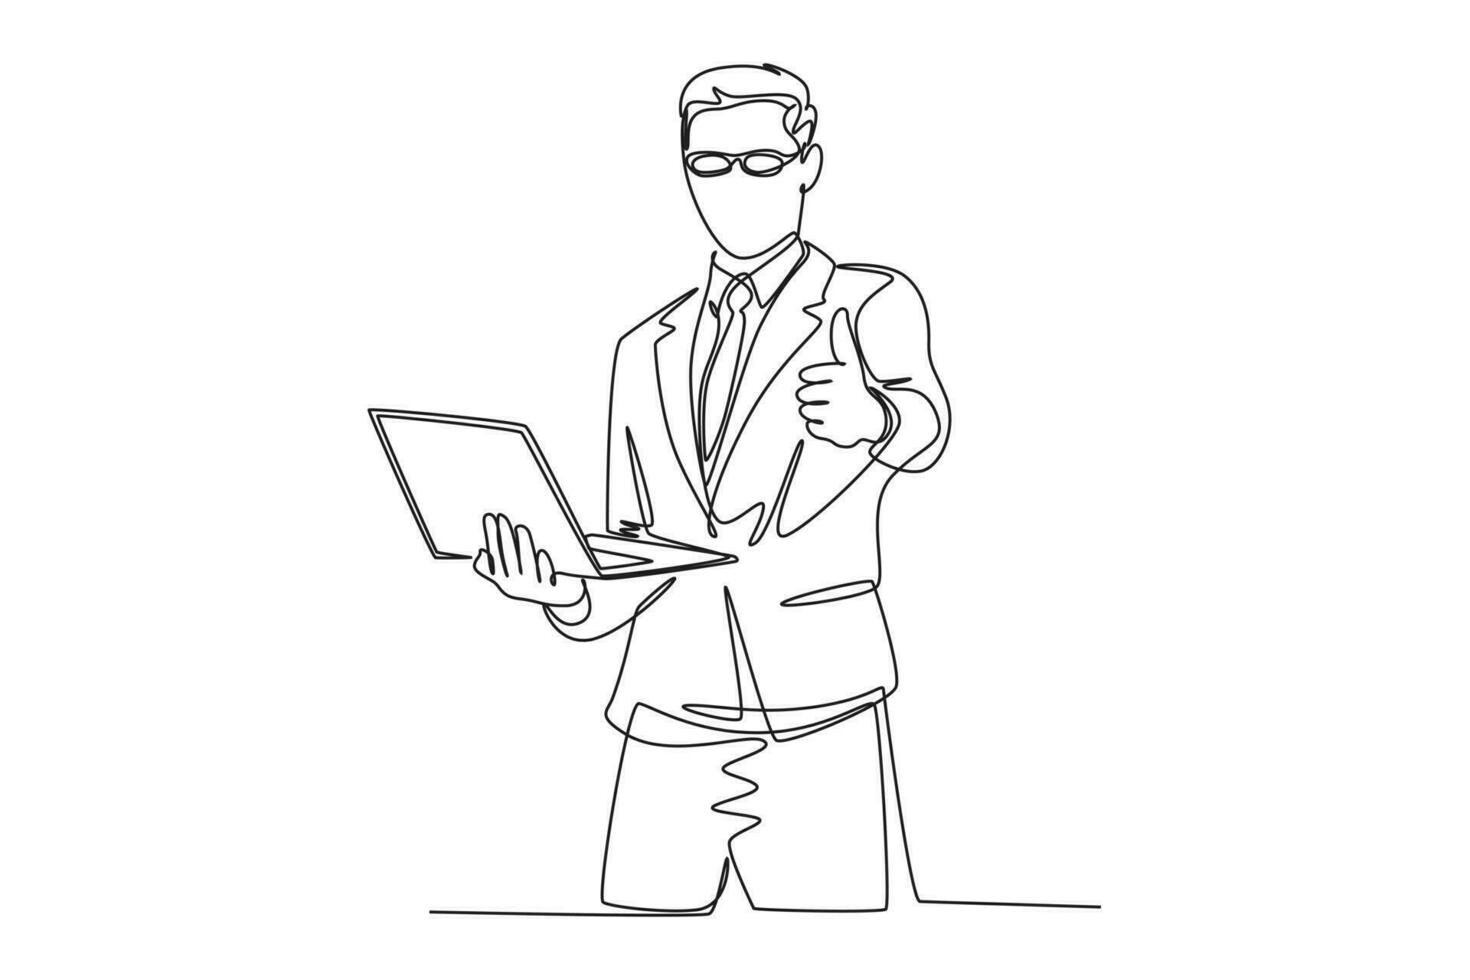 Single continuous line drawing young happy businessman stand up and carrying laptop while giving thumb up gesture. Business service excellence concept. One line draw graphic design vector illustration